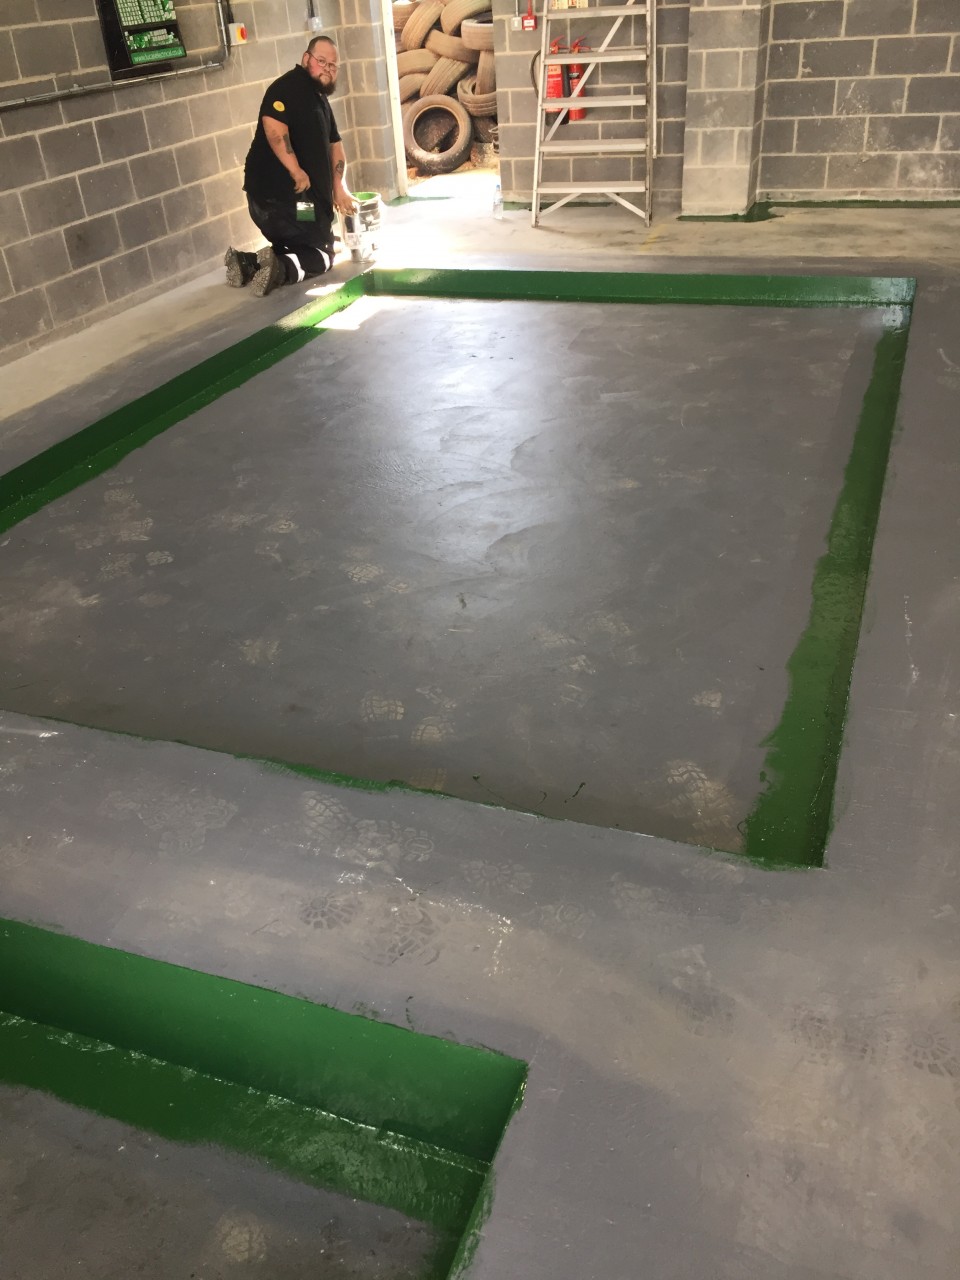 COMPLETED AND SET CONCRETE READY FOR THE INSTALLATION OF THE NEW MOT EQUIPMENT.